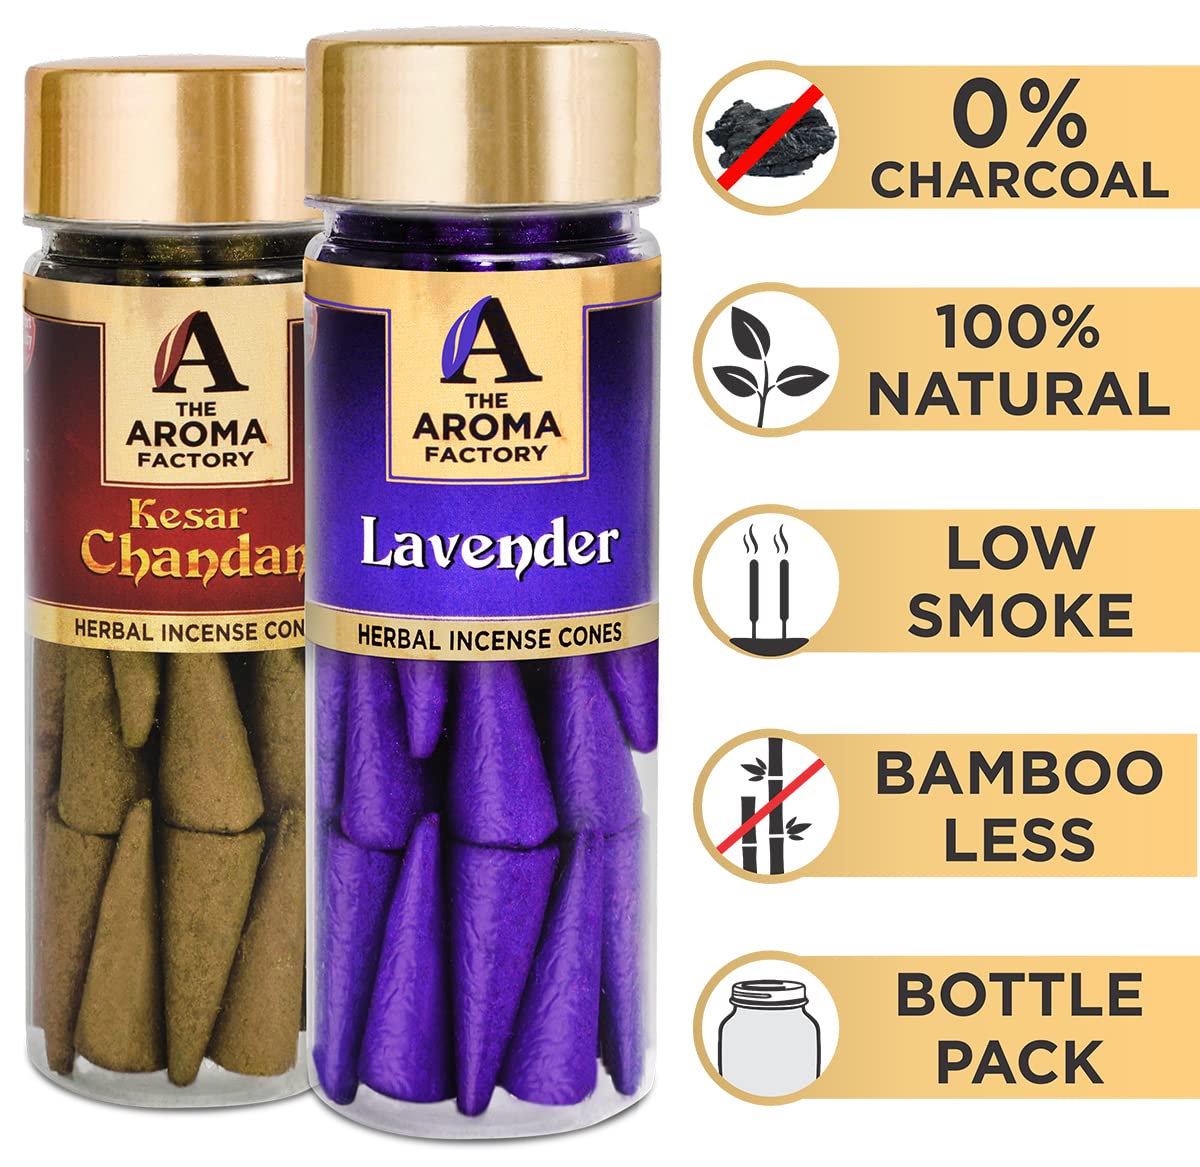 The Aroma Factory Incense Dhoop Cone for Pooja, Kesar Chandan & Lavender (100% Herbal & 0% Charcoal) 2 Bottles x 30 Cones